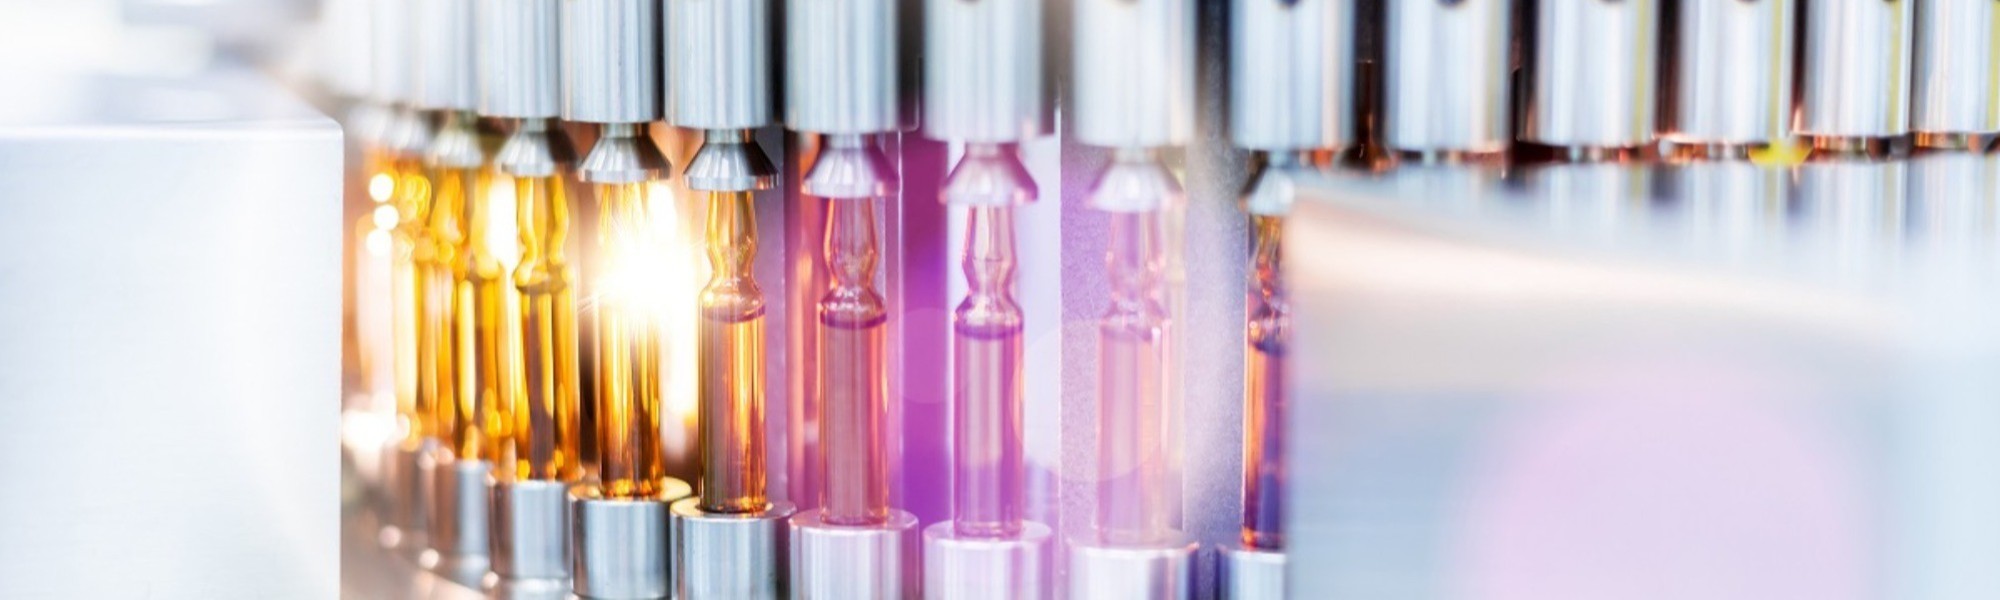 Biopharma image of vials at a production site